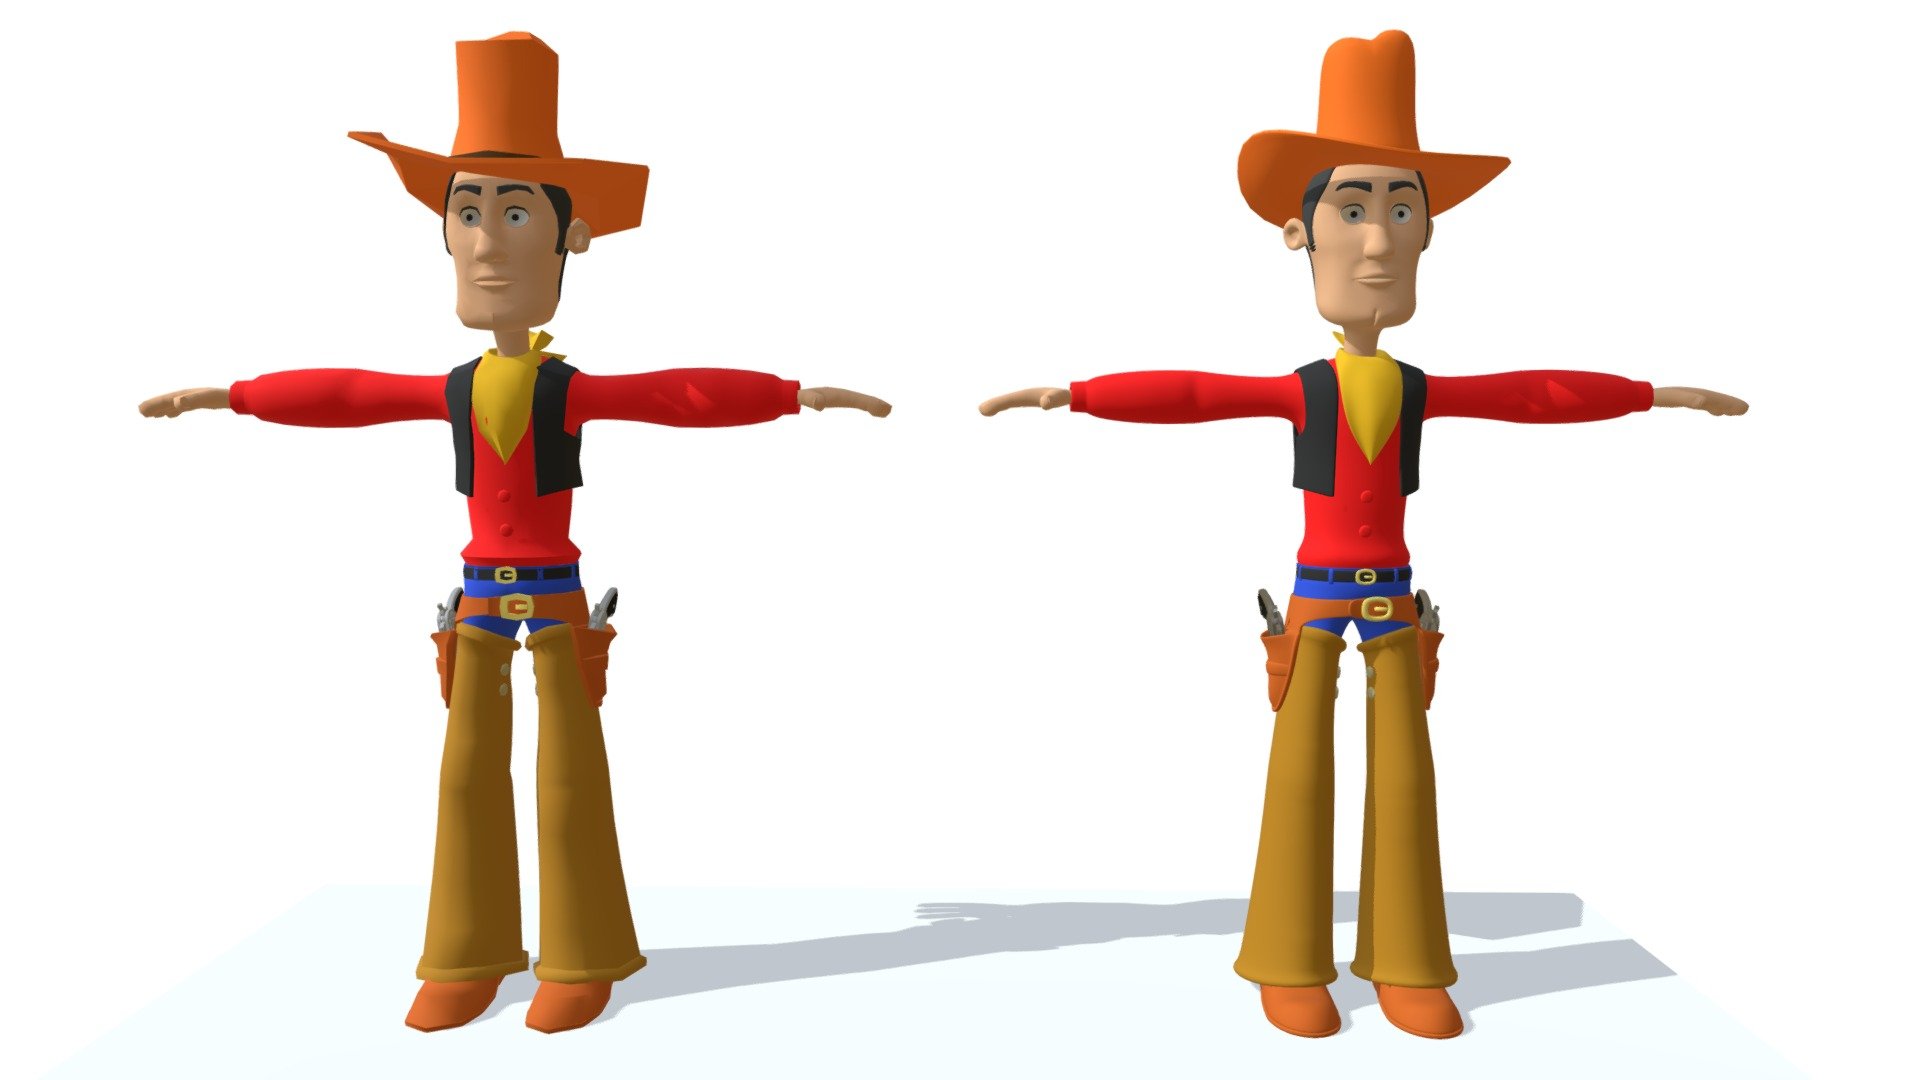 Quality 3d model of cartoon cowboy character. Every format includes 2 versions of the model; with and without smooth (base mesh).

Included Formats:

3ds Max

3DS

Lightwave

OBJ

Softimage

Maya - Cartoon Cowboy Character - Buy Royalty Free 3D model by 3DHorse 3d model